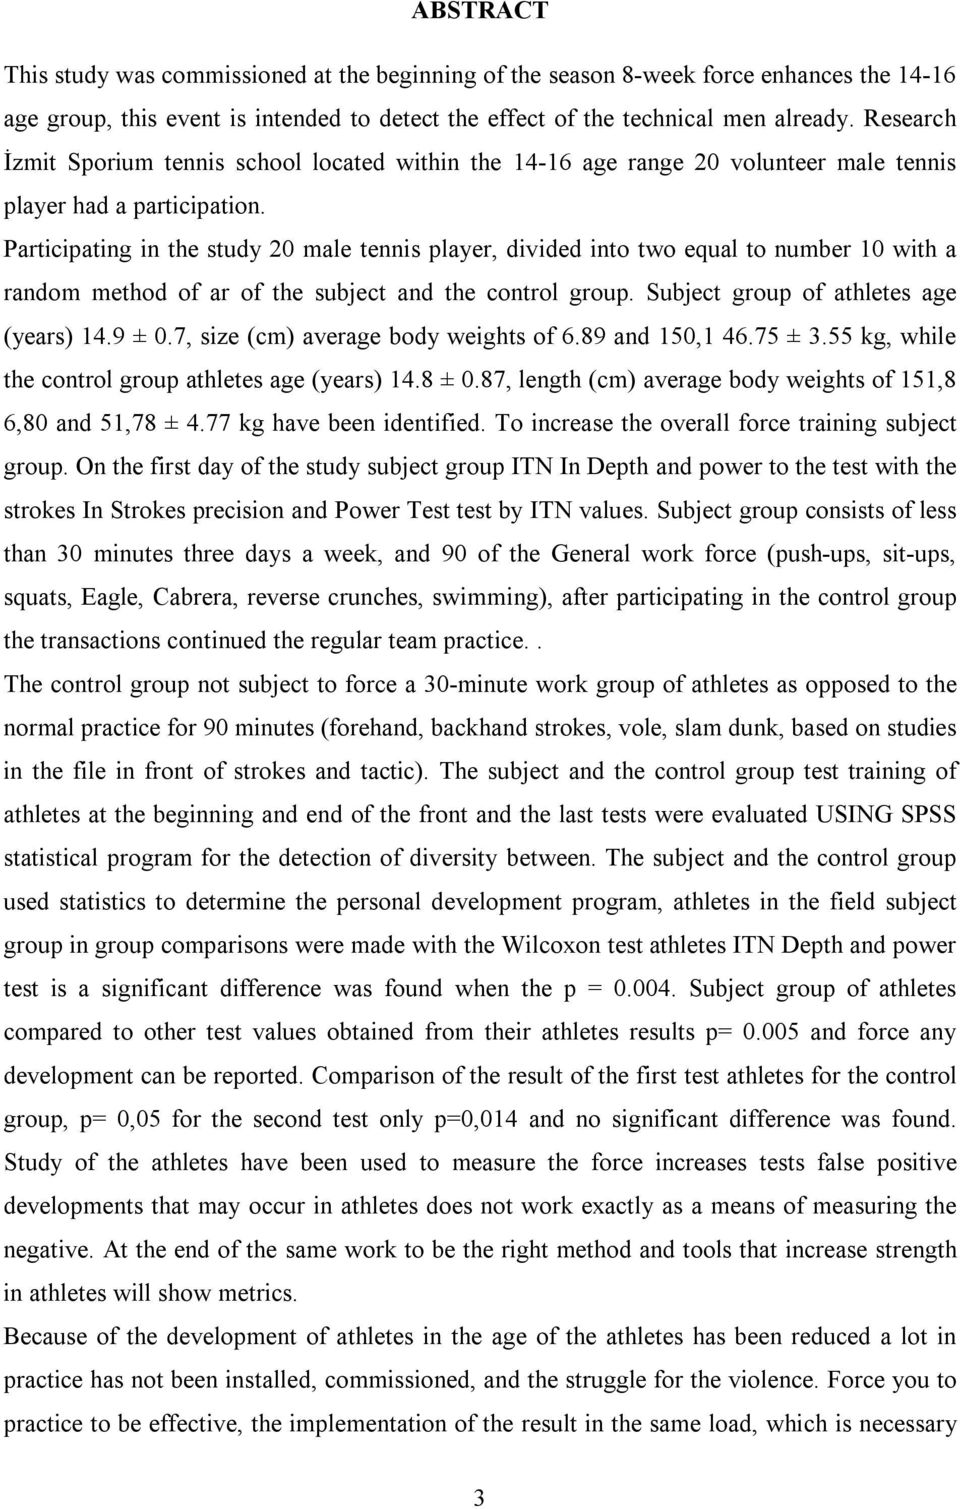 Participating in the study 20 male tennis player, divided into two equal to number 10 with a random method of ar of the subject and the control group. Subject group of athletes age (years) 14.9 ± 0.